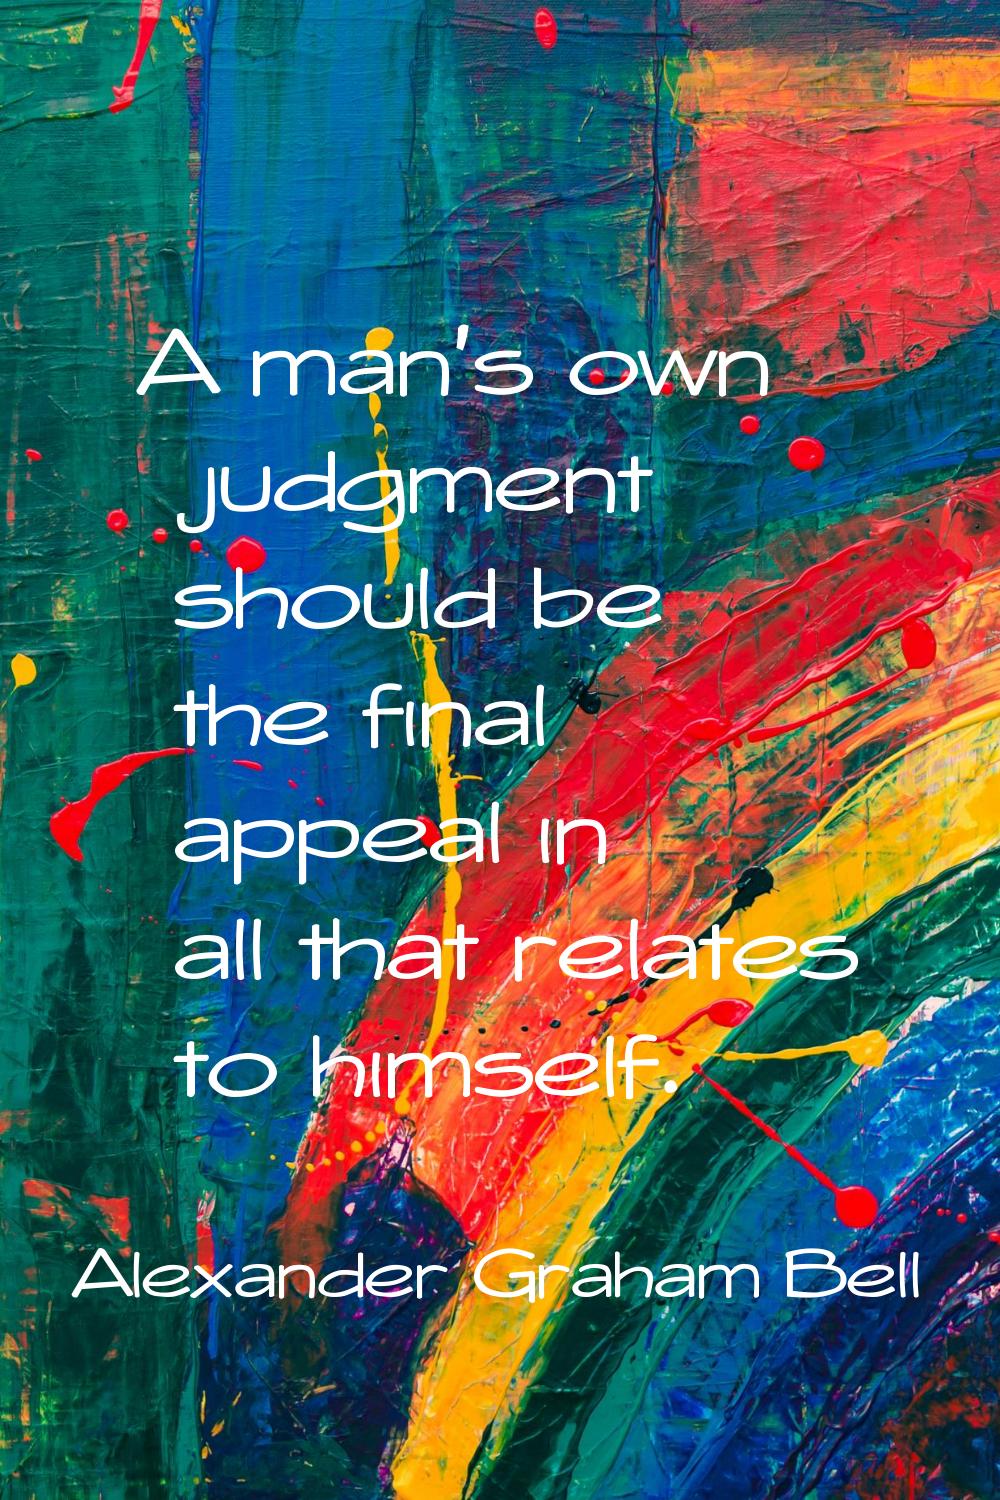 A man's own judgment should be the final appeal in all that relates to himself.